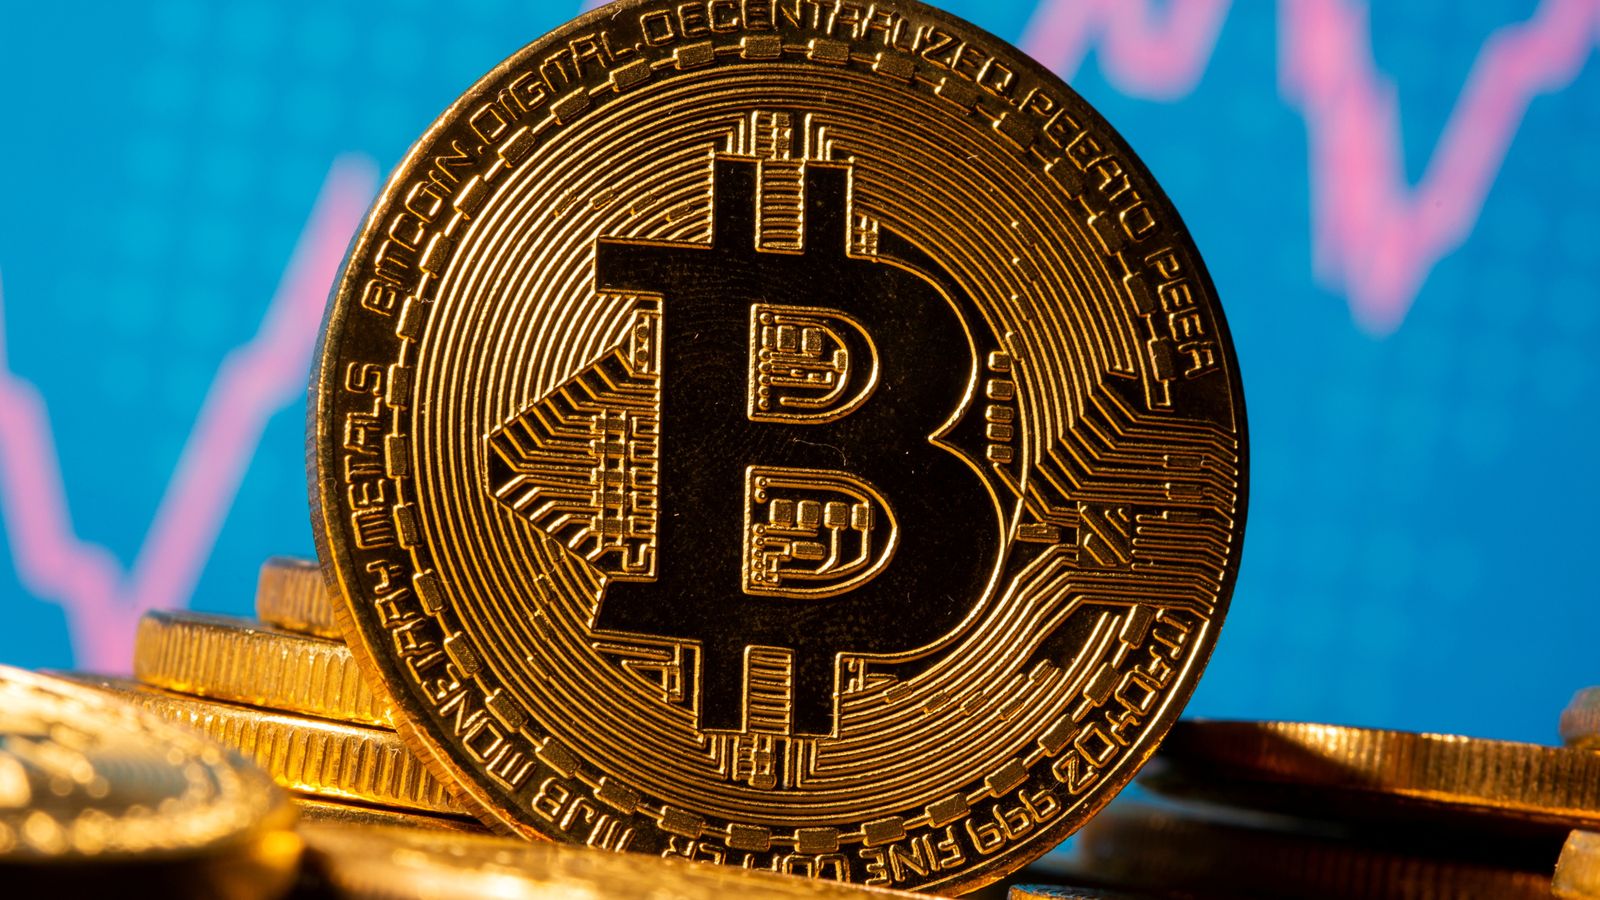 Bitcoin storms past $50,000 for first time as mainstream appeal grows